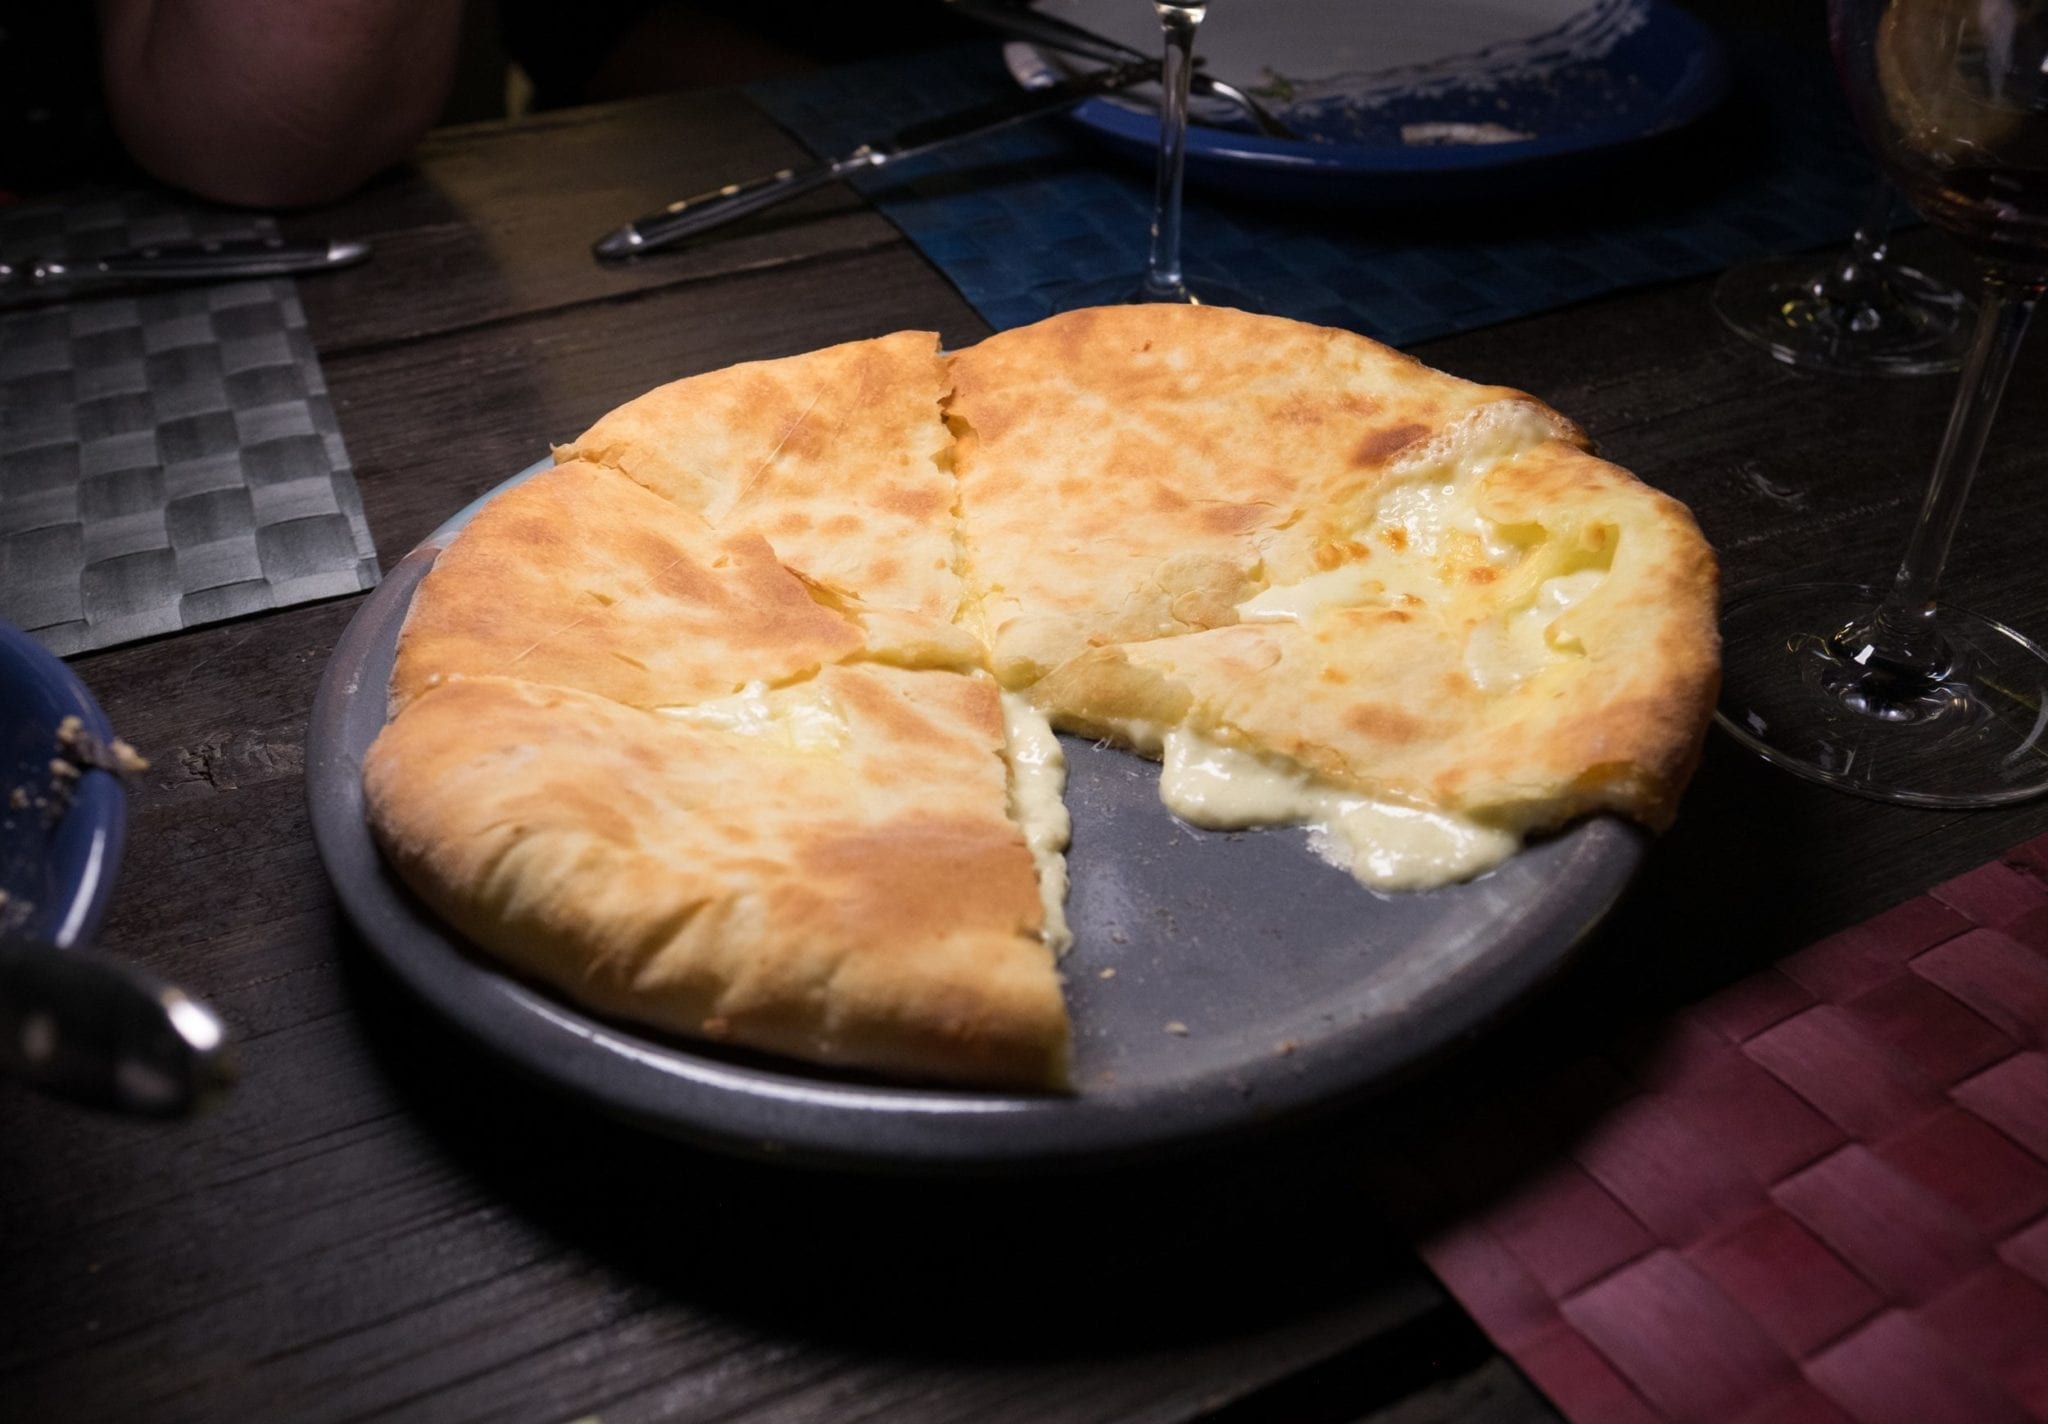 A khachapuri (Georgian cheese pie) with one slice missing, the cheese oozing out.